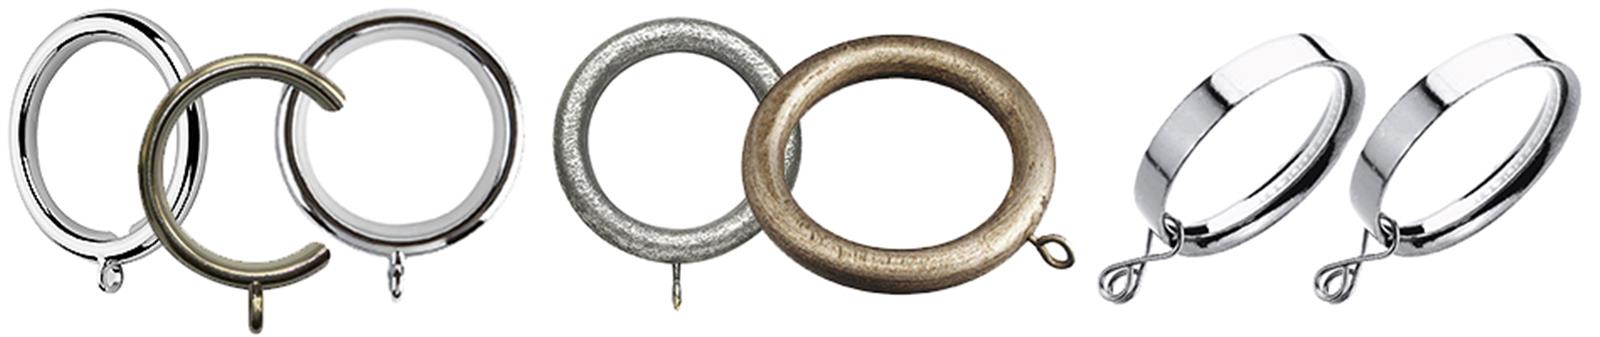 Special Offer Curtain Pole Rings & Gliders